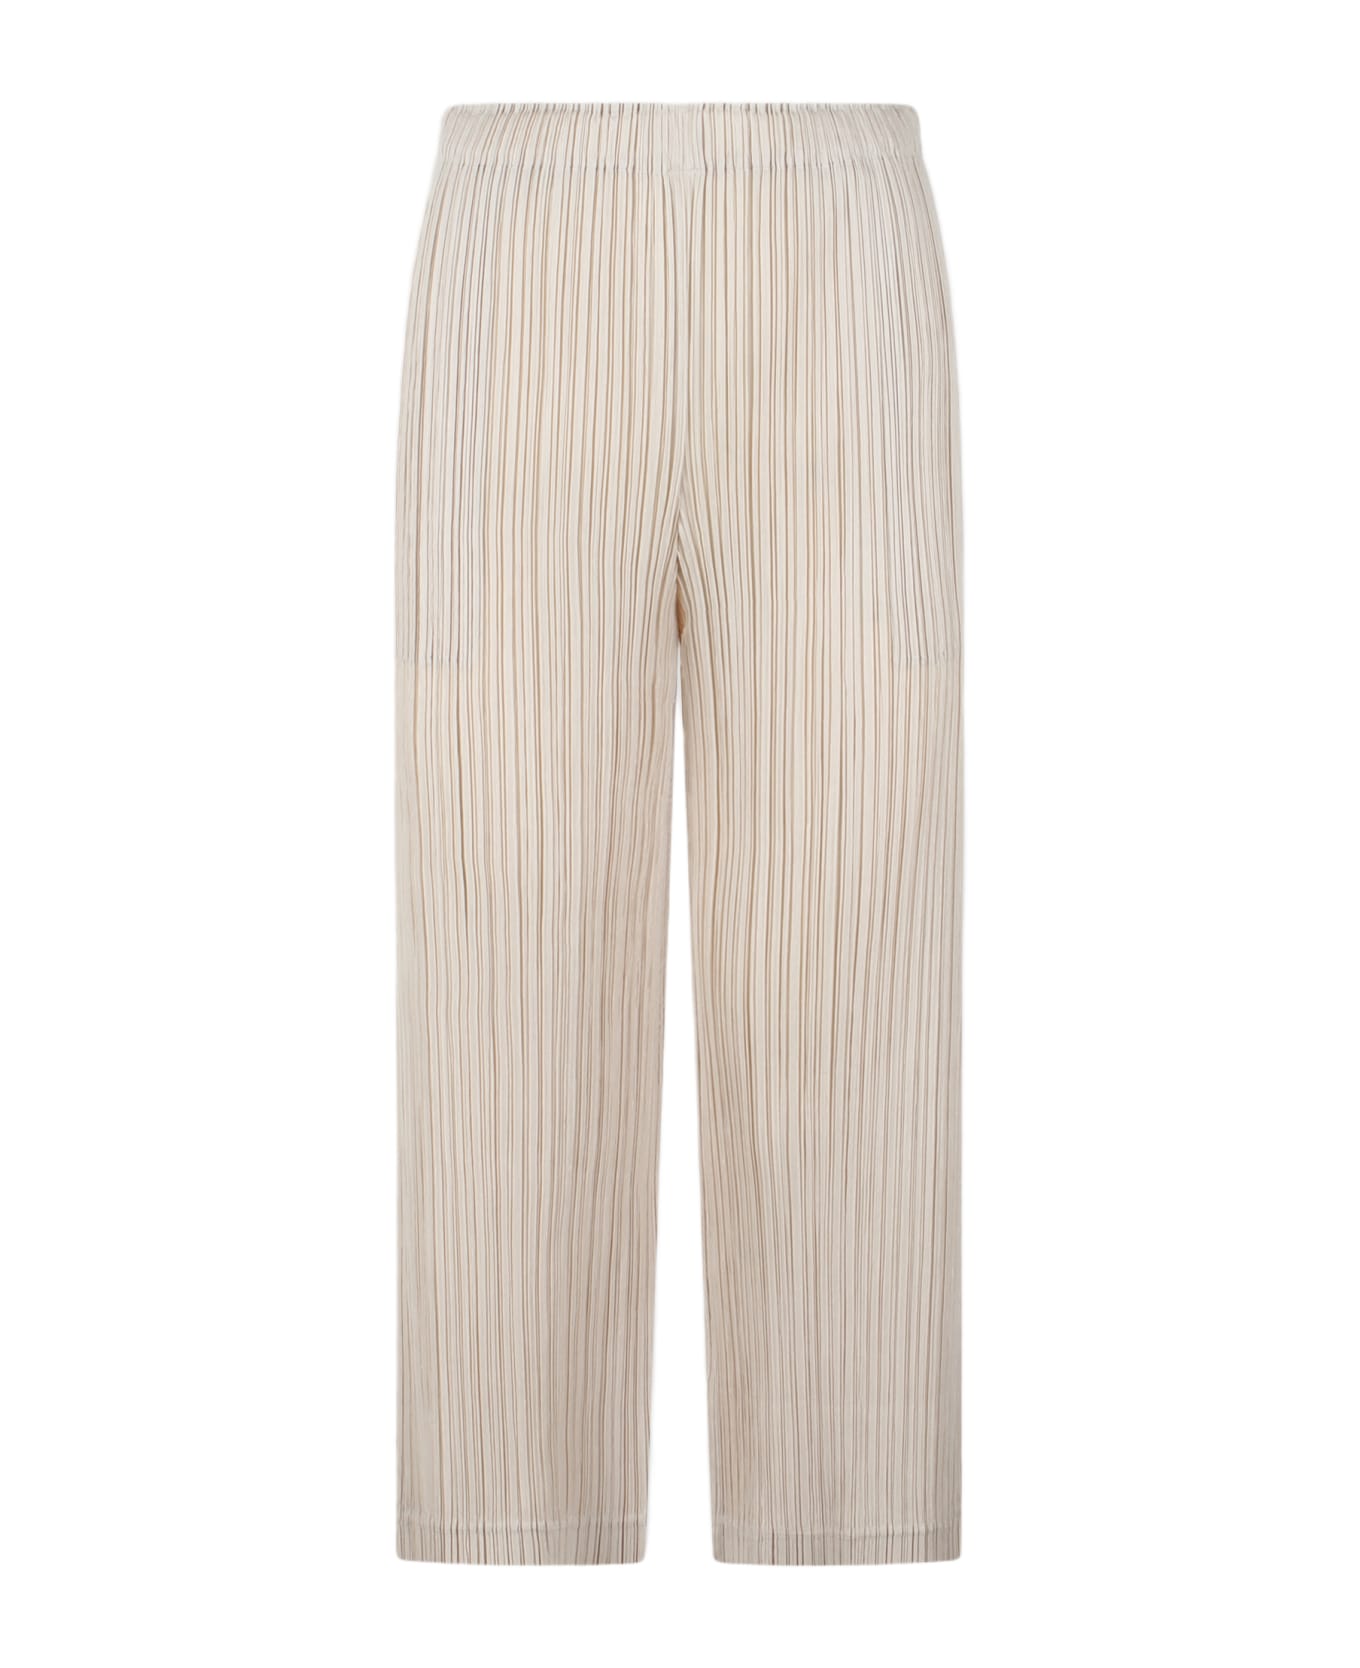 Pleats Please Issey Miyake Thicker Bottoms 1 Trousers - Cream